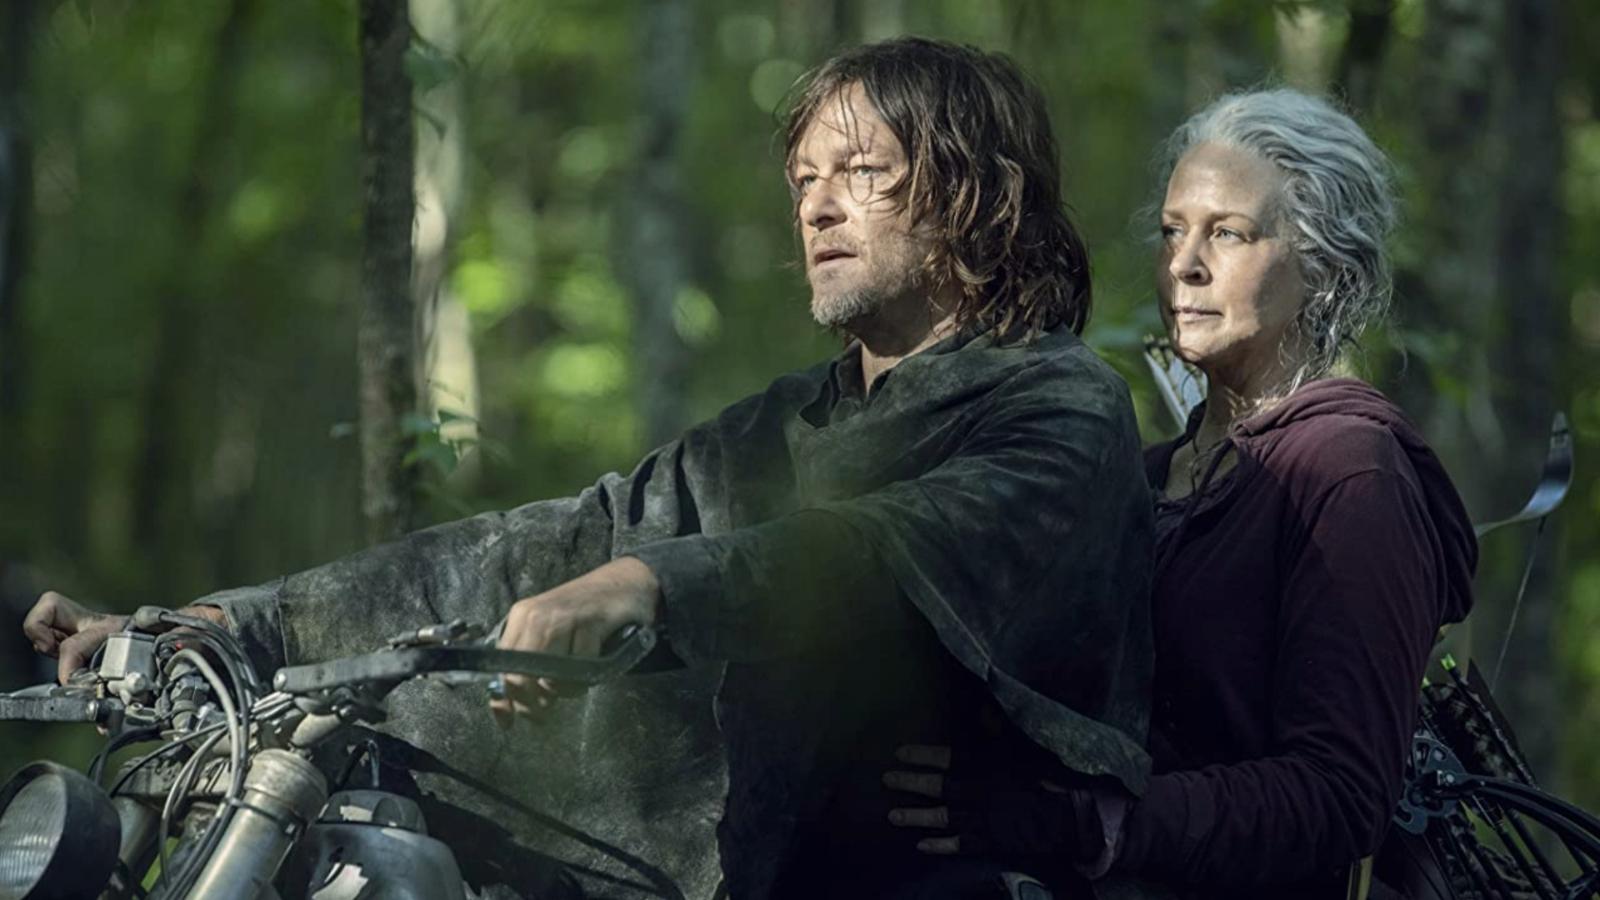 Norman Reedus and Melissa McBride as Daryl and Carol in The Walking Dead, sitting on a motorcycle